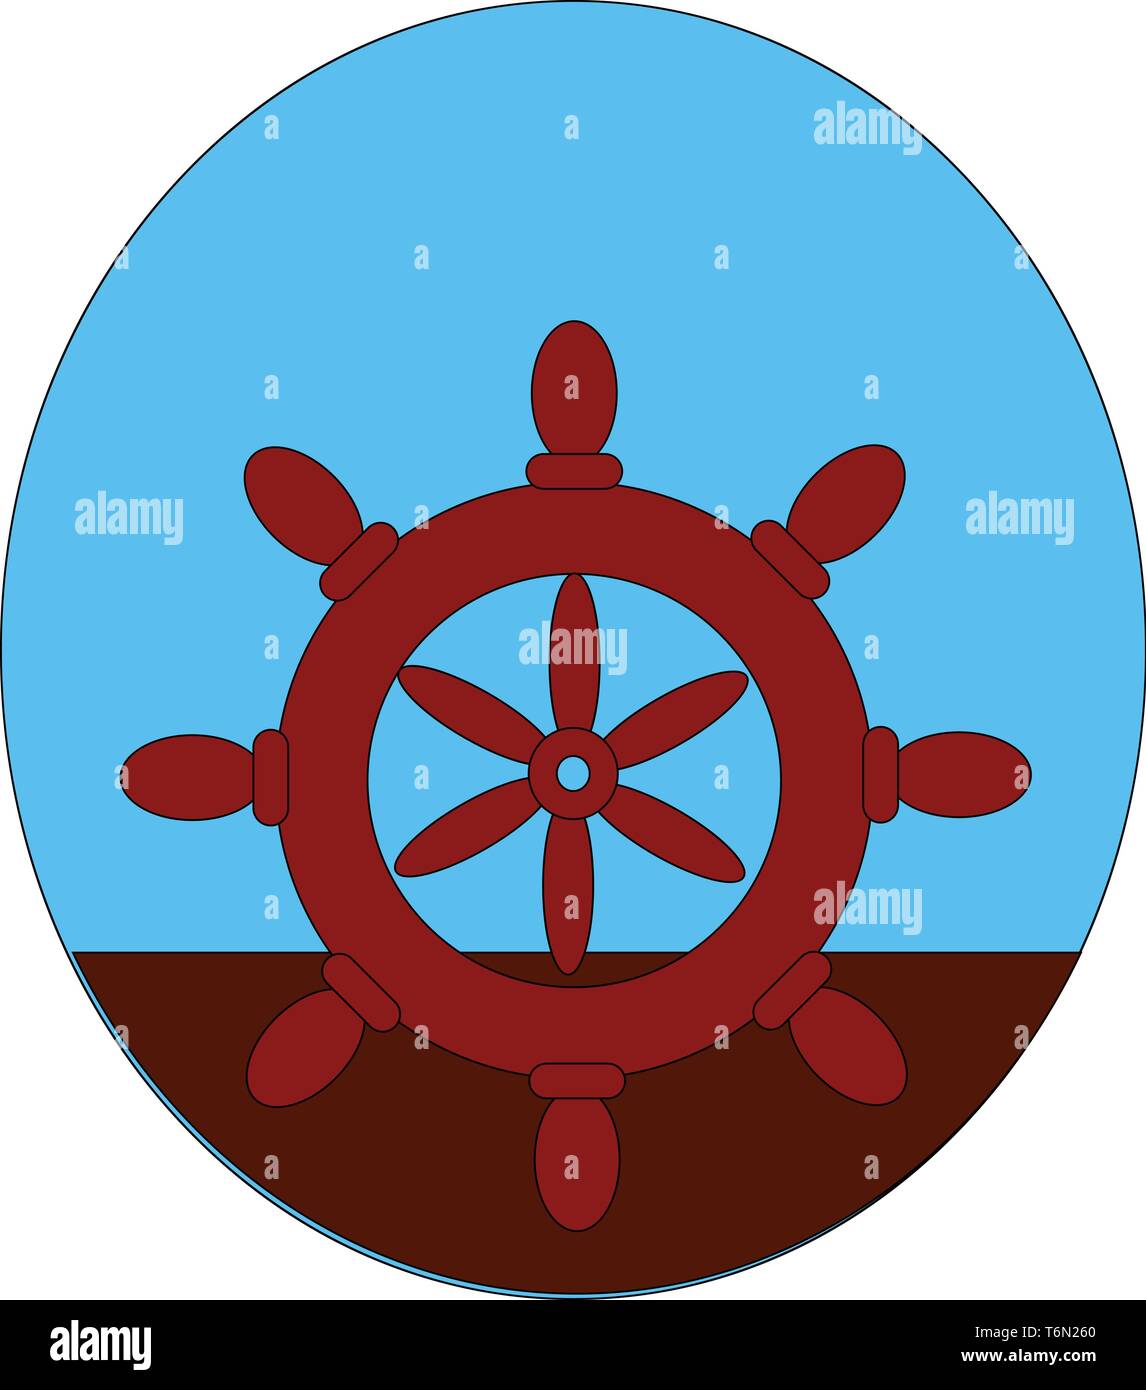 A maroon-colored ship's steering wheel composed of eight cylindrical wooden spokes shaped like balusters and all joined at a central wooden hub  vecto Stock Vector